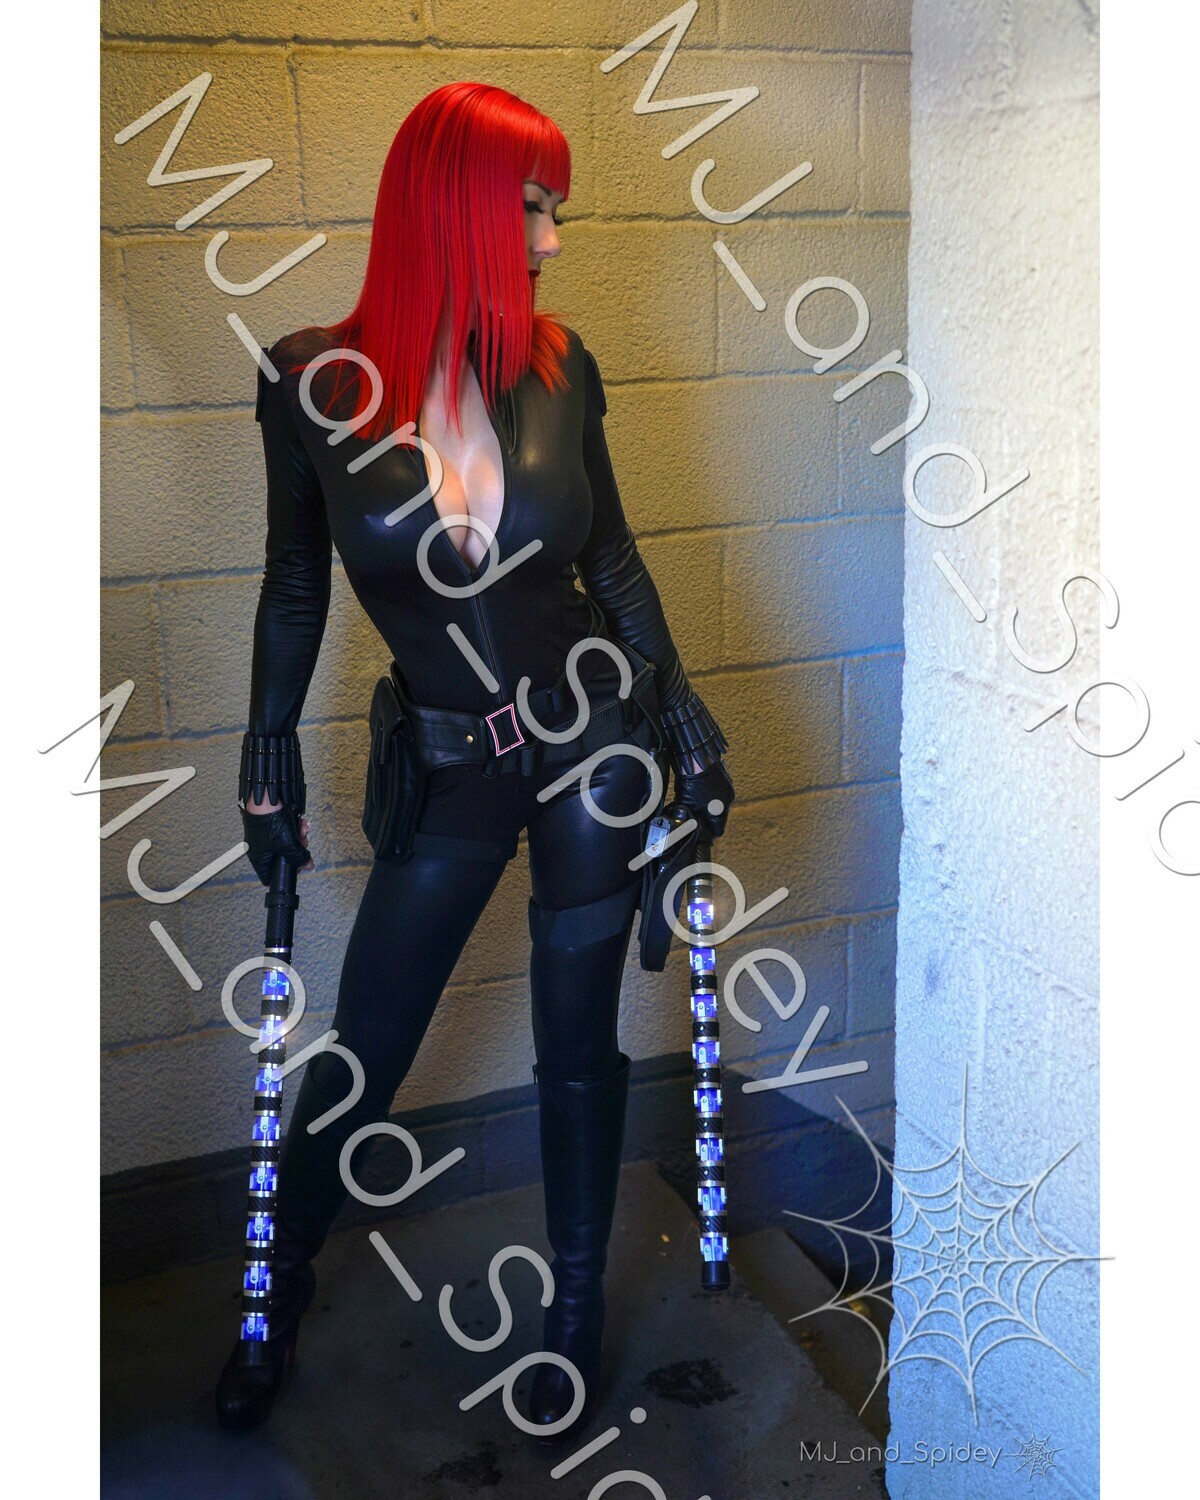 Marvel - Avengers - Black Widow No. 9 - Digital Cosplay Image (@MJ_and_Spidey, MJ and Spidey, Comics)